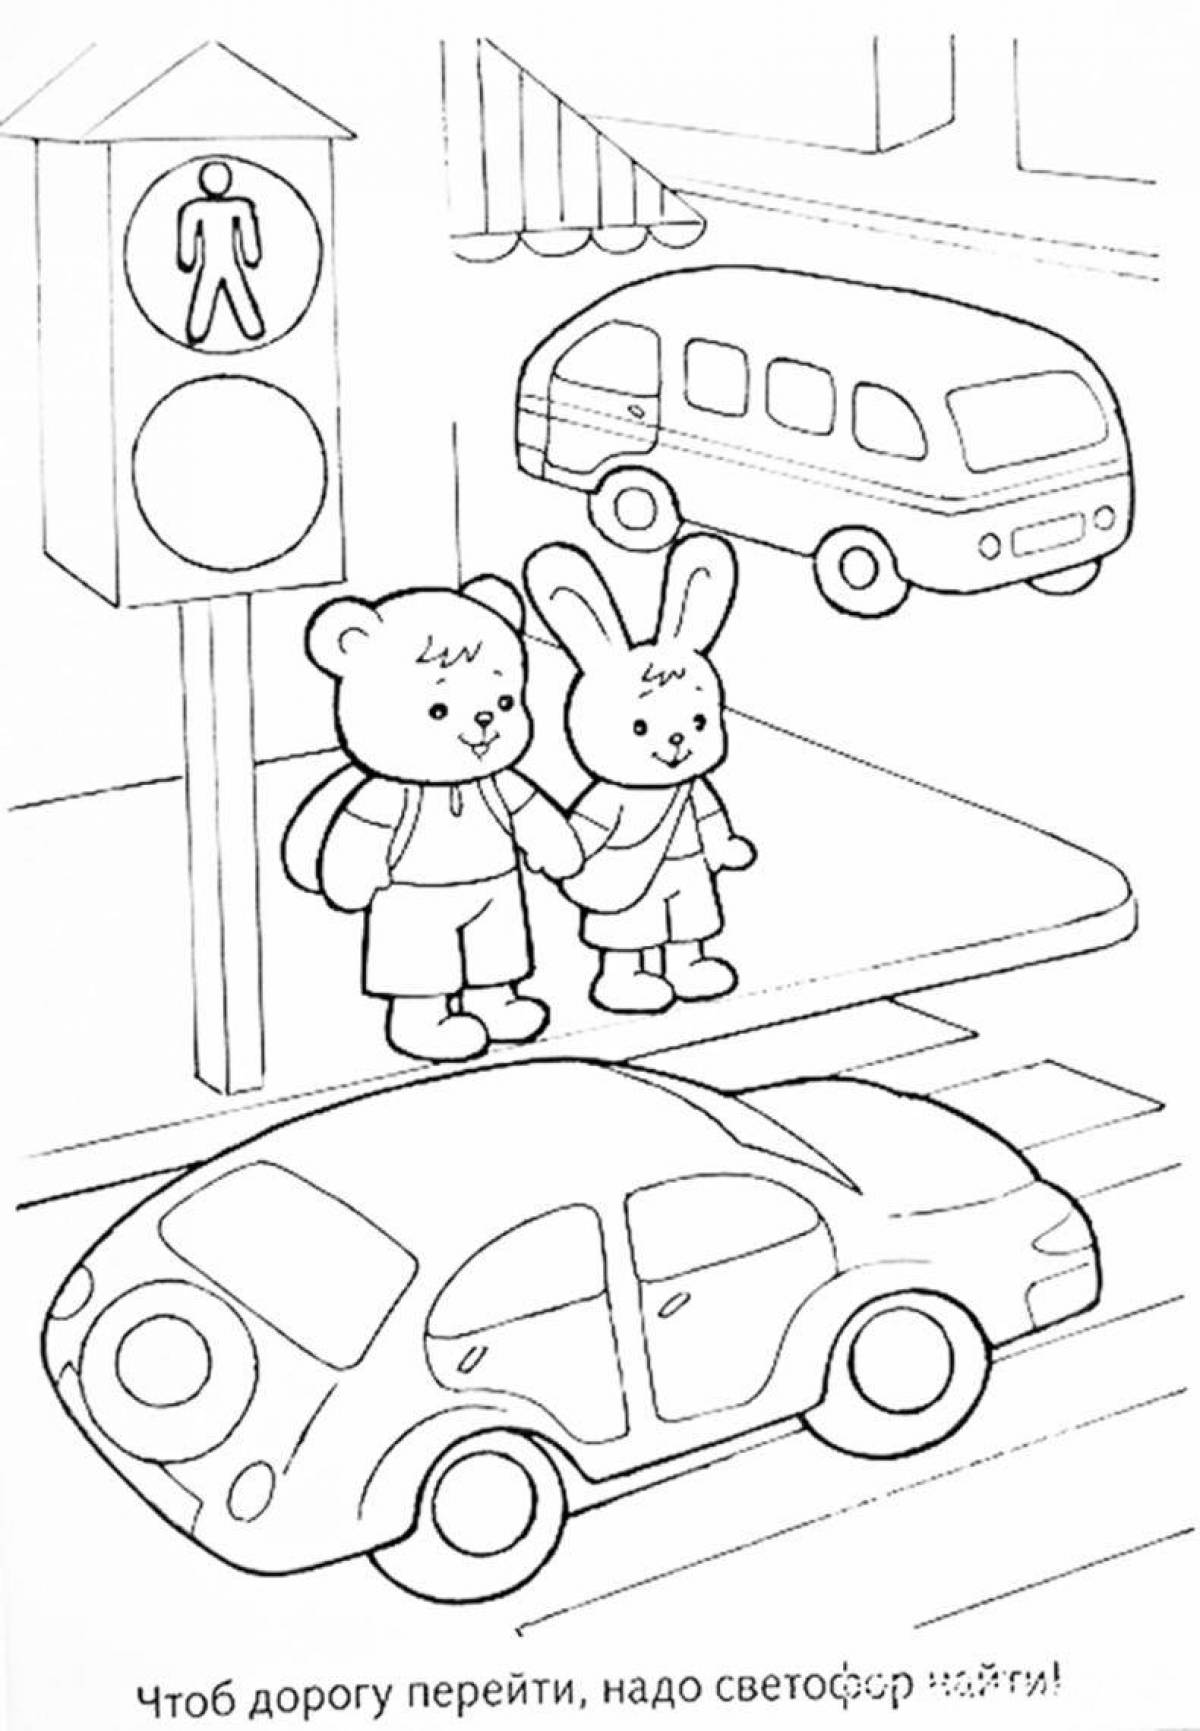 Tempting rules of the road 1st grade coloring book